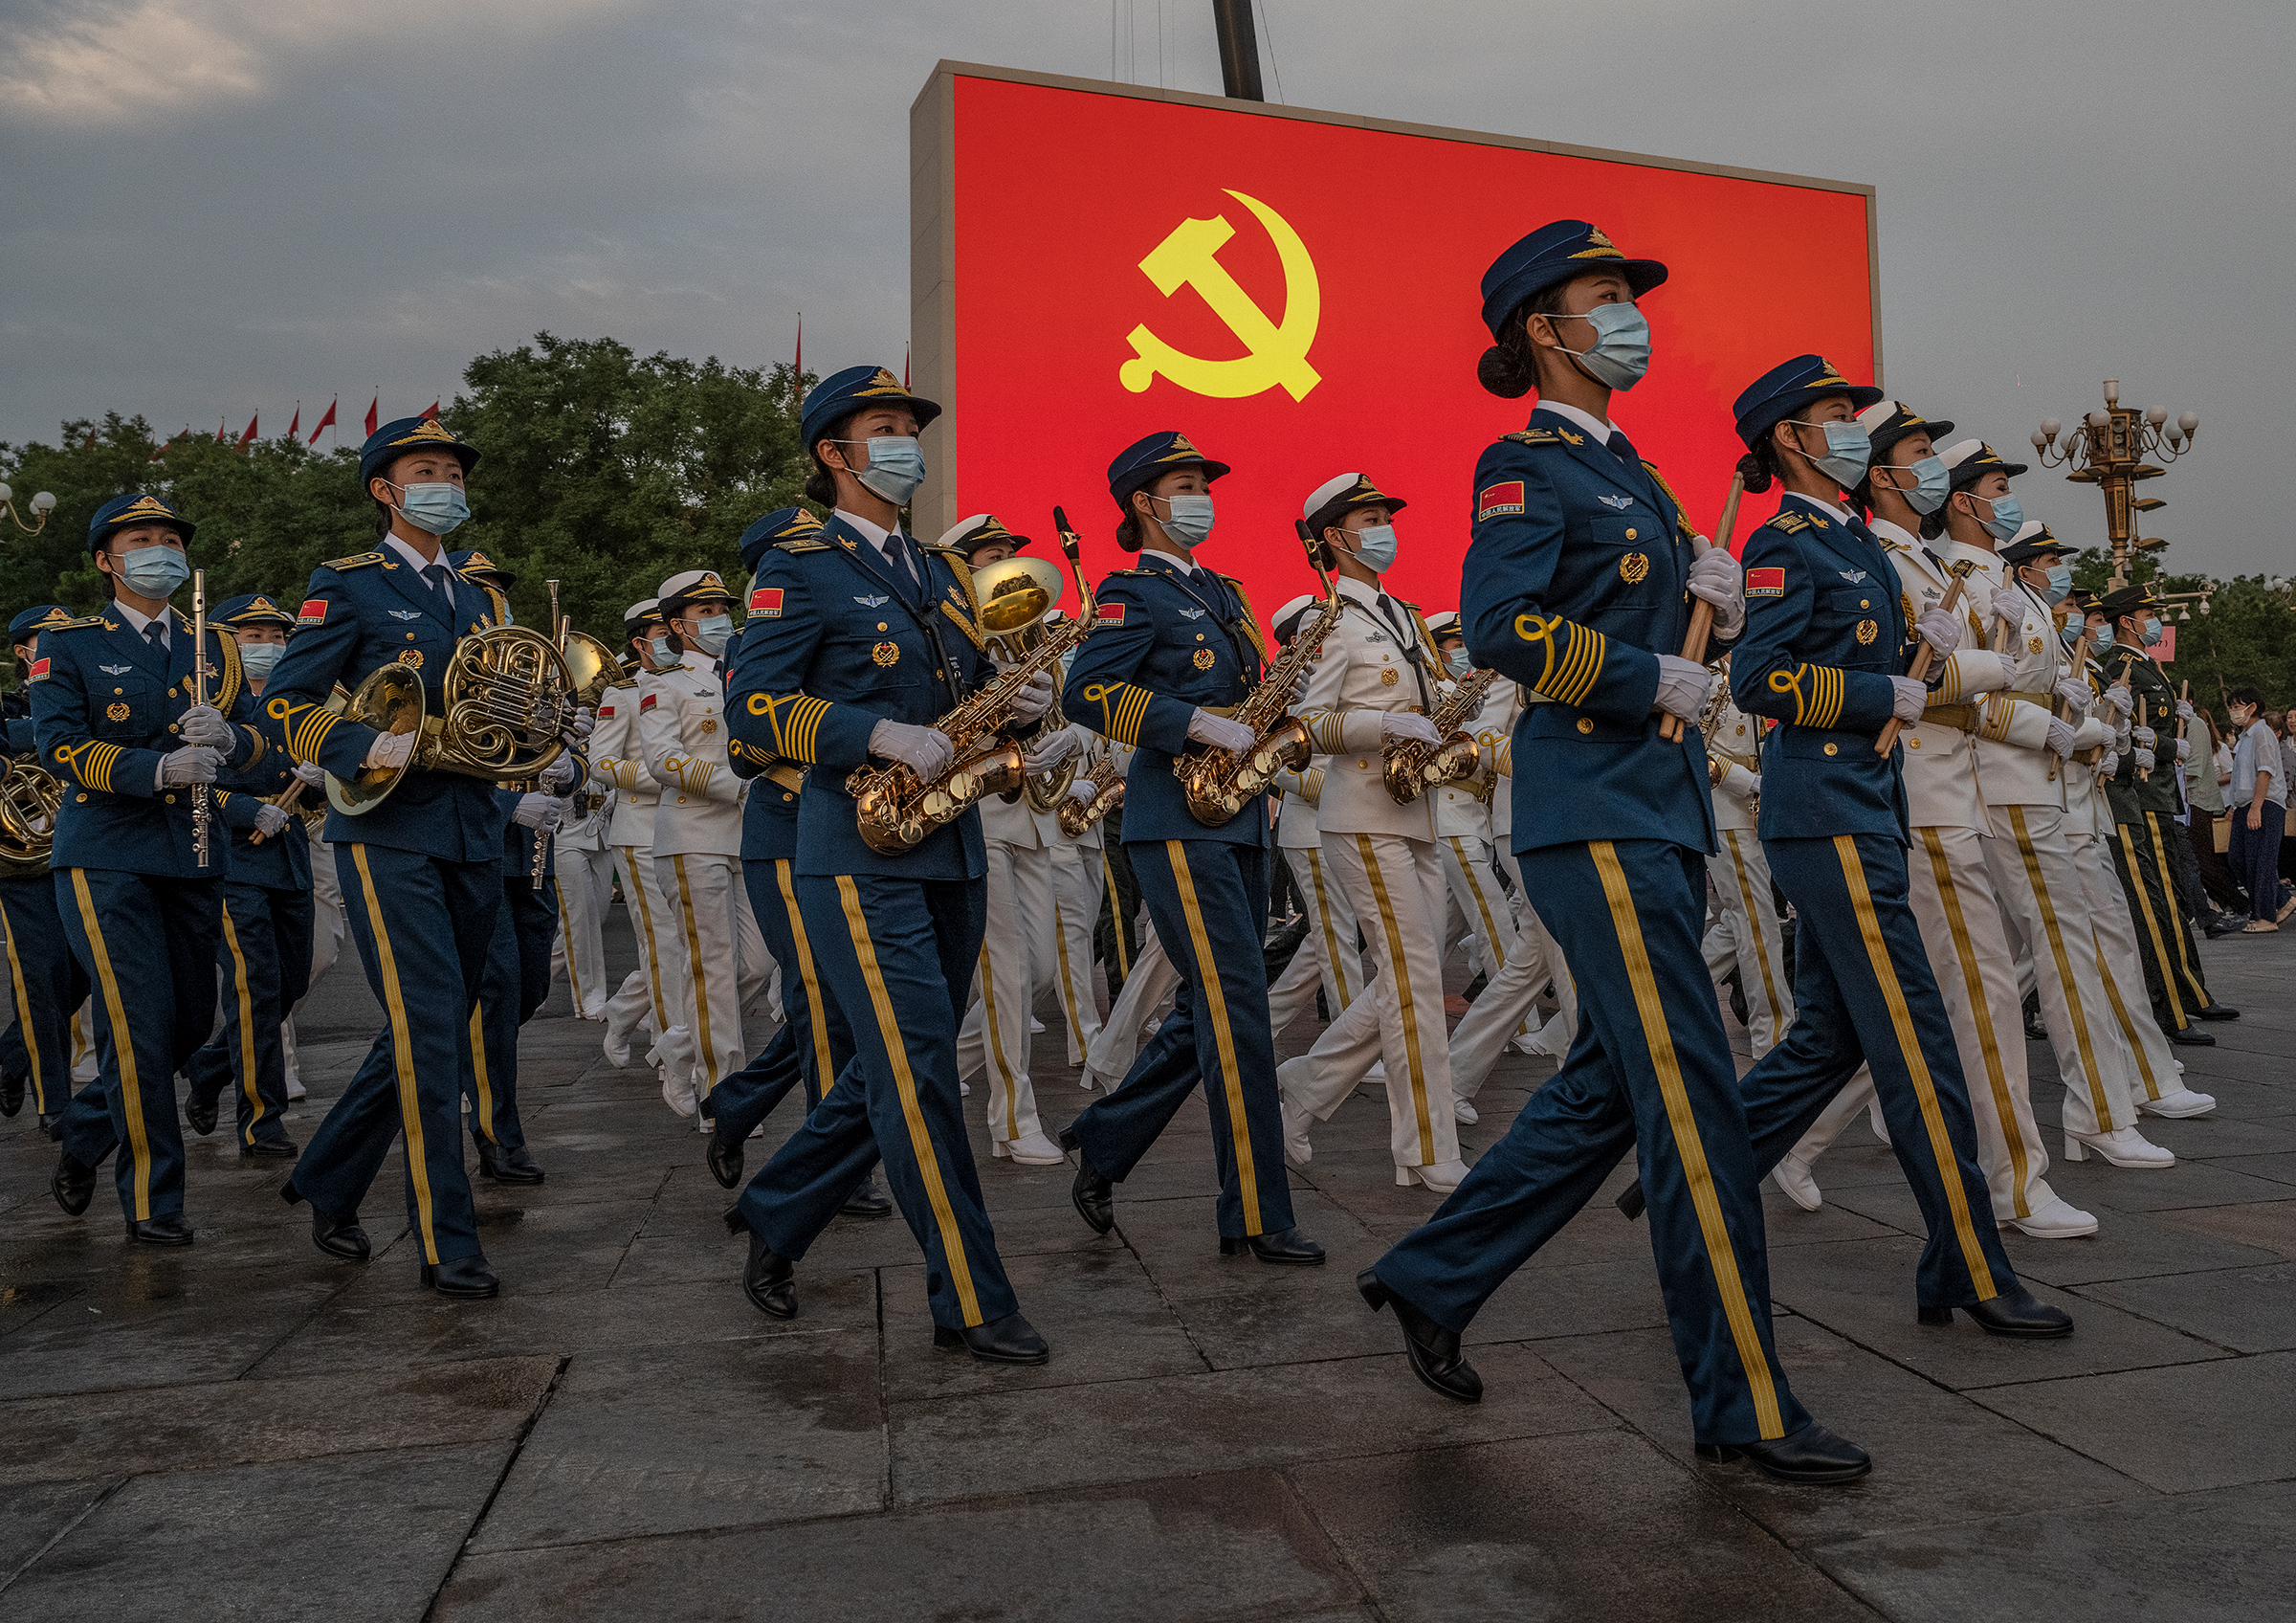 Female members of a People's Liberation Army ceremonial band march at a ceremony marking the 100th anniversary of the Communist Party in Beijing's Tiananmen Square on July 1, 2021.